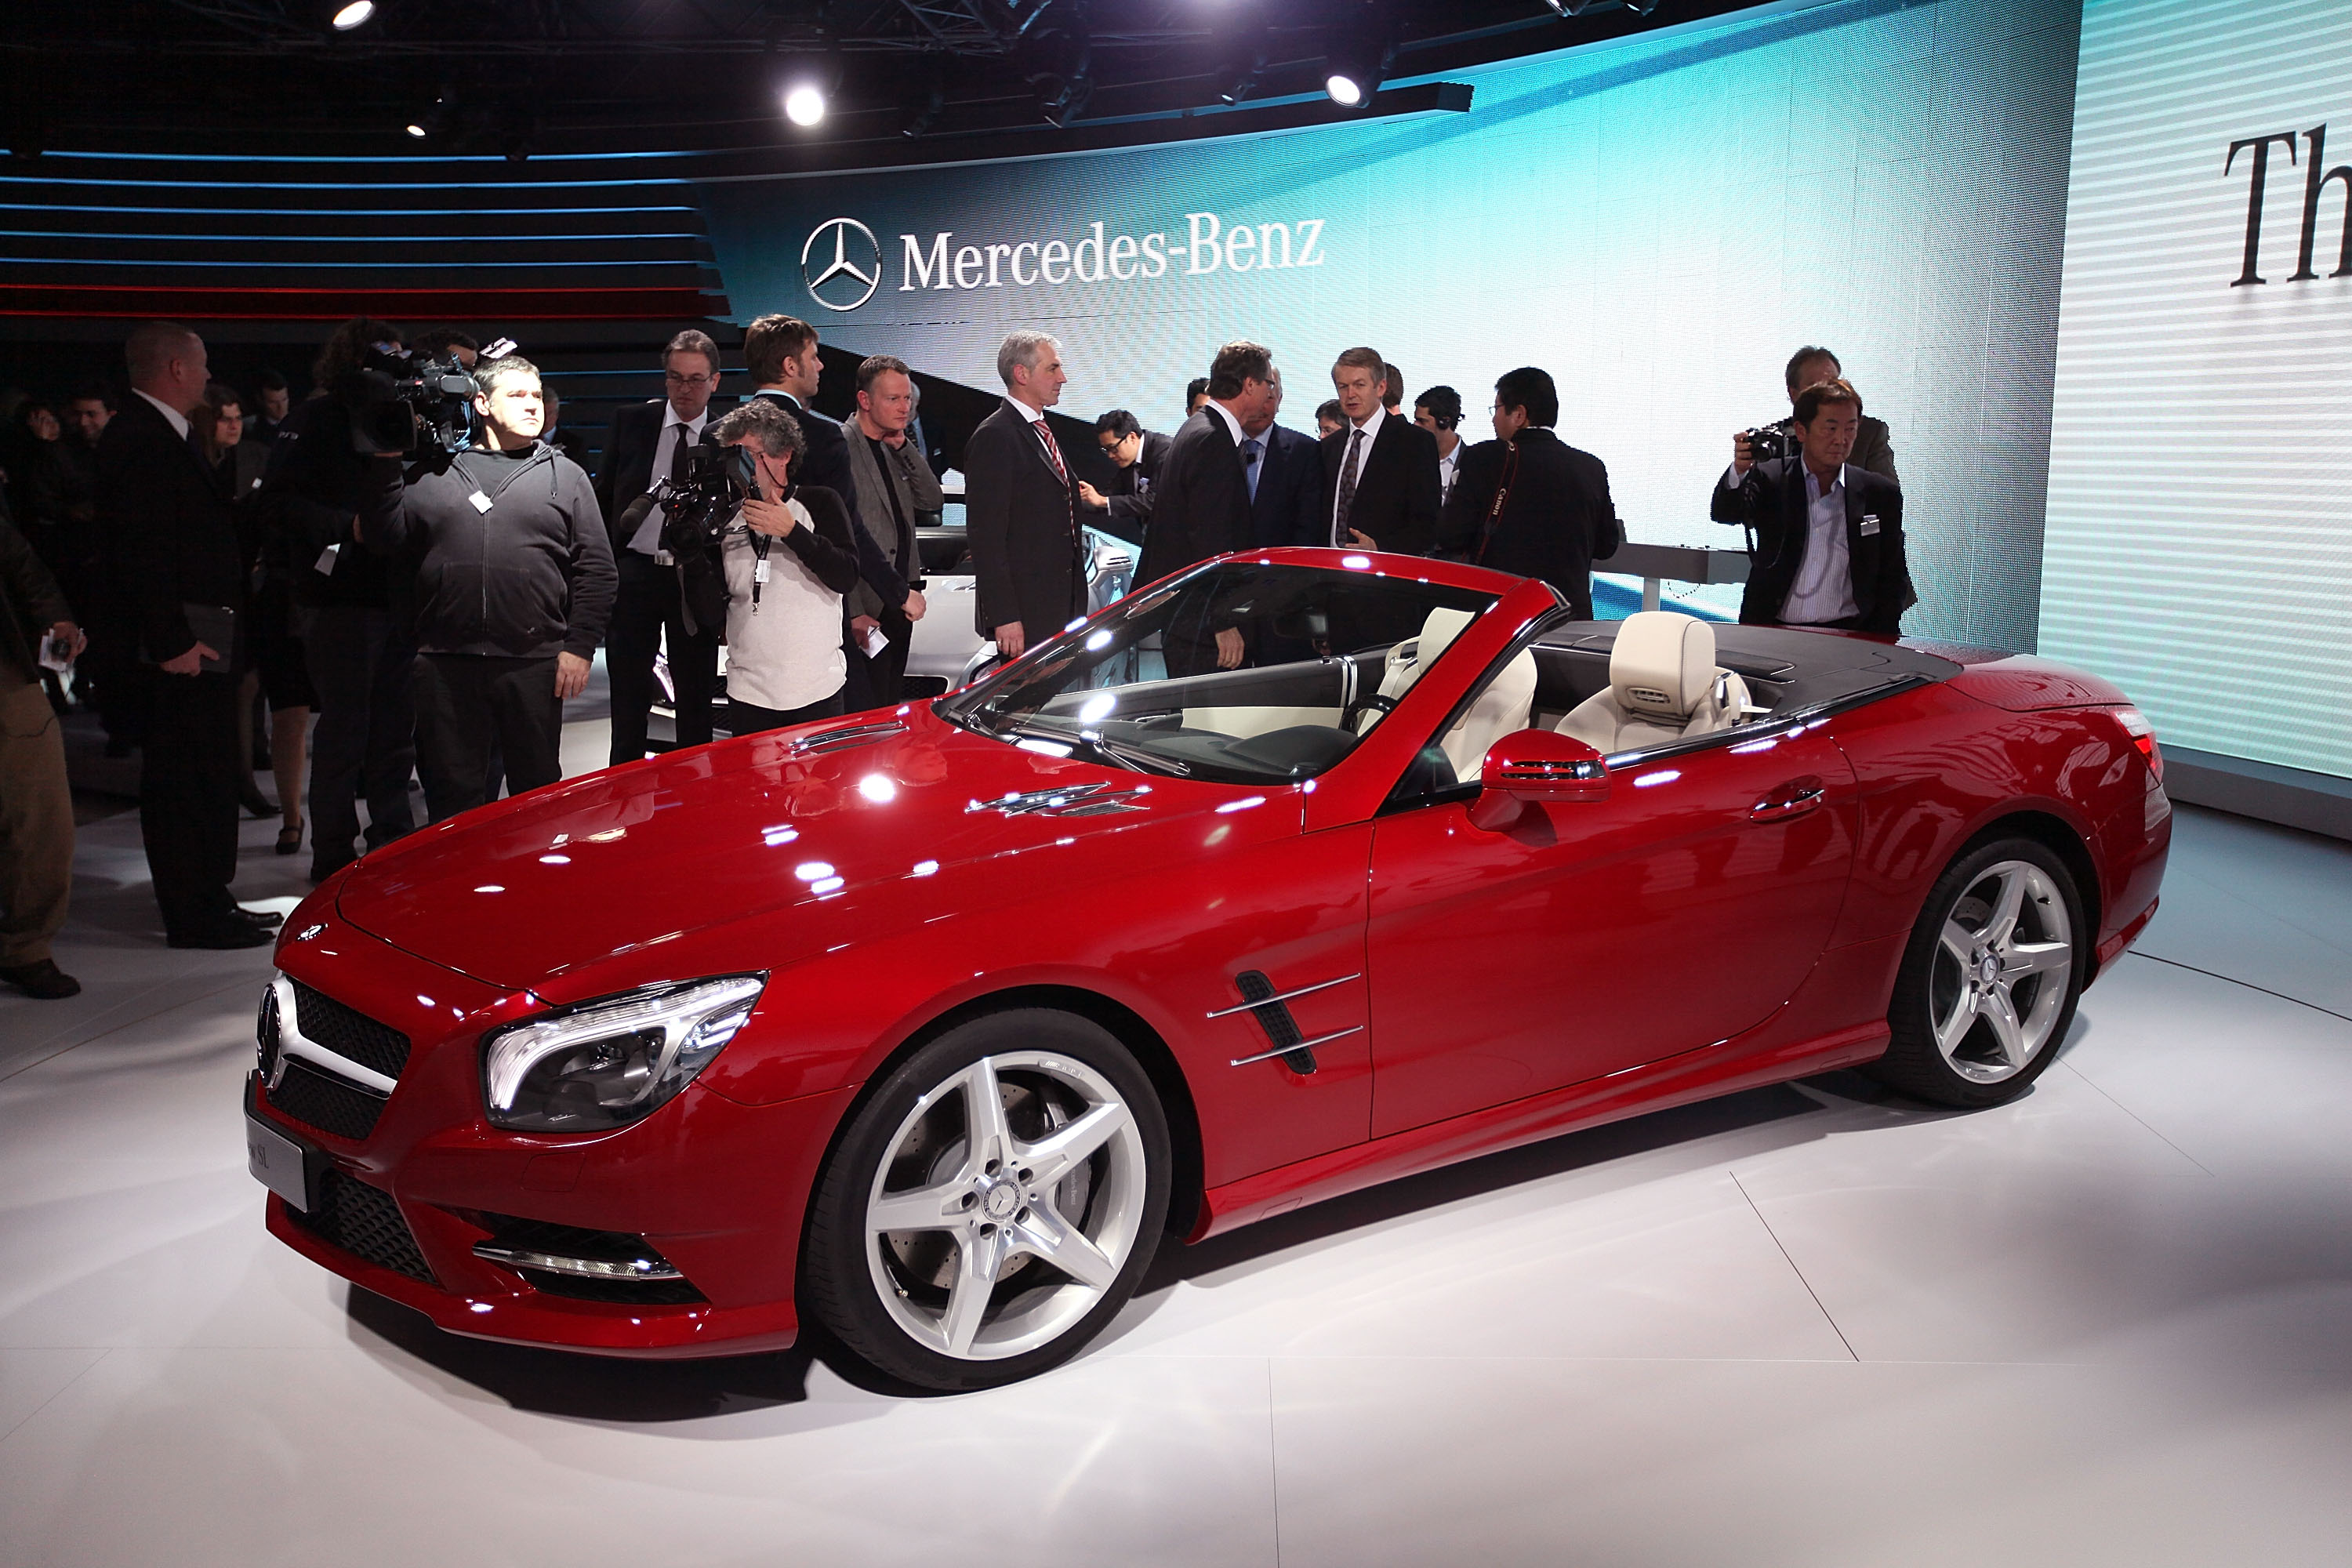 Mercedes Benz And Cadillac Hold Events Ahead of North American Int'l Auto Show